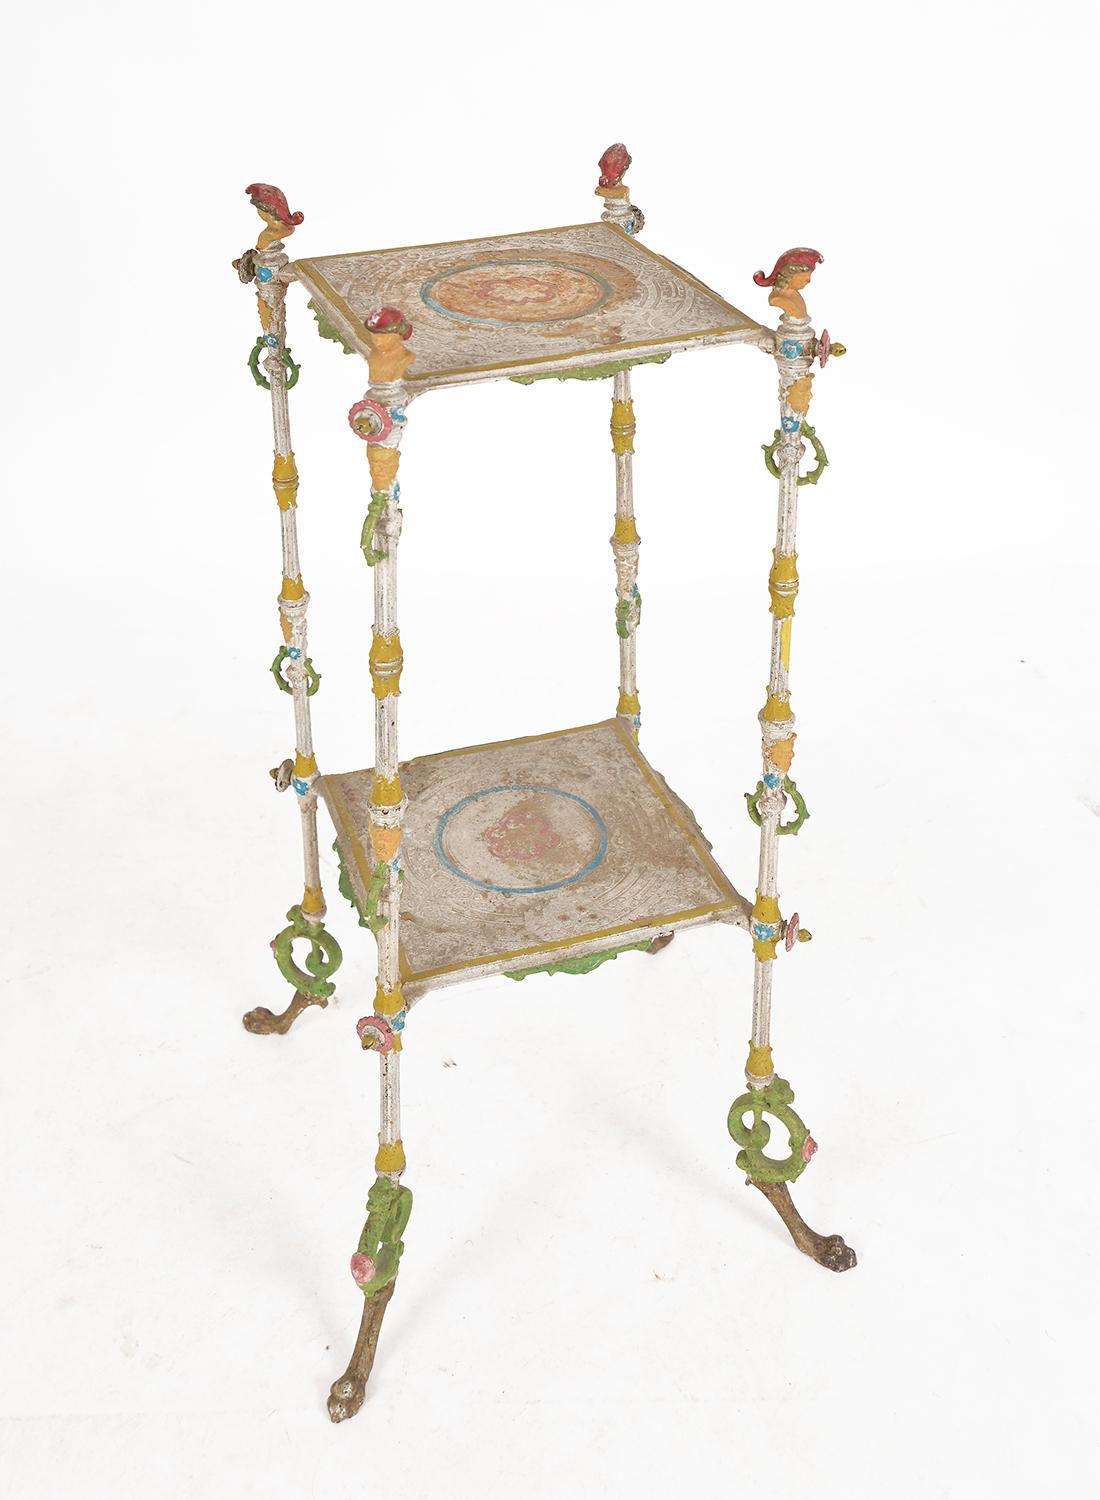 Highly decorative, Belle Époque late 19th century two-tier cast iron polychrome painted torchere on paw feet, painted in a cacophony of colours from milky stone white, green, burgundy and yellow to orange, pink, blue and peach, the paint has the